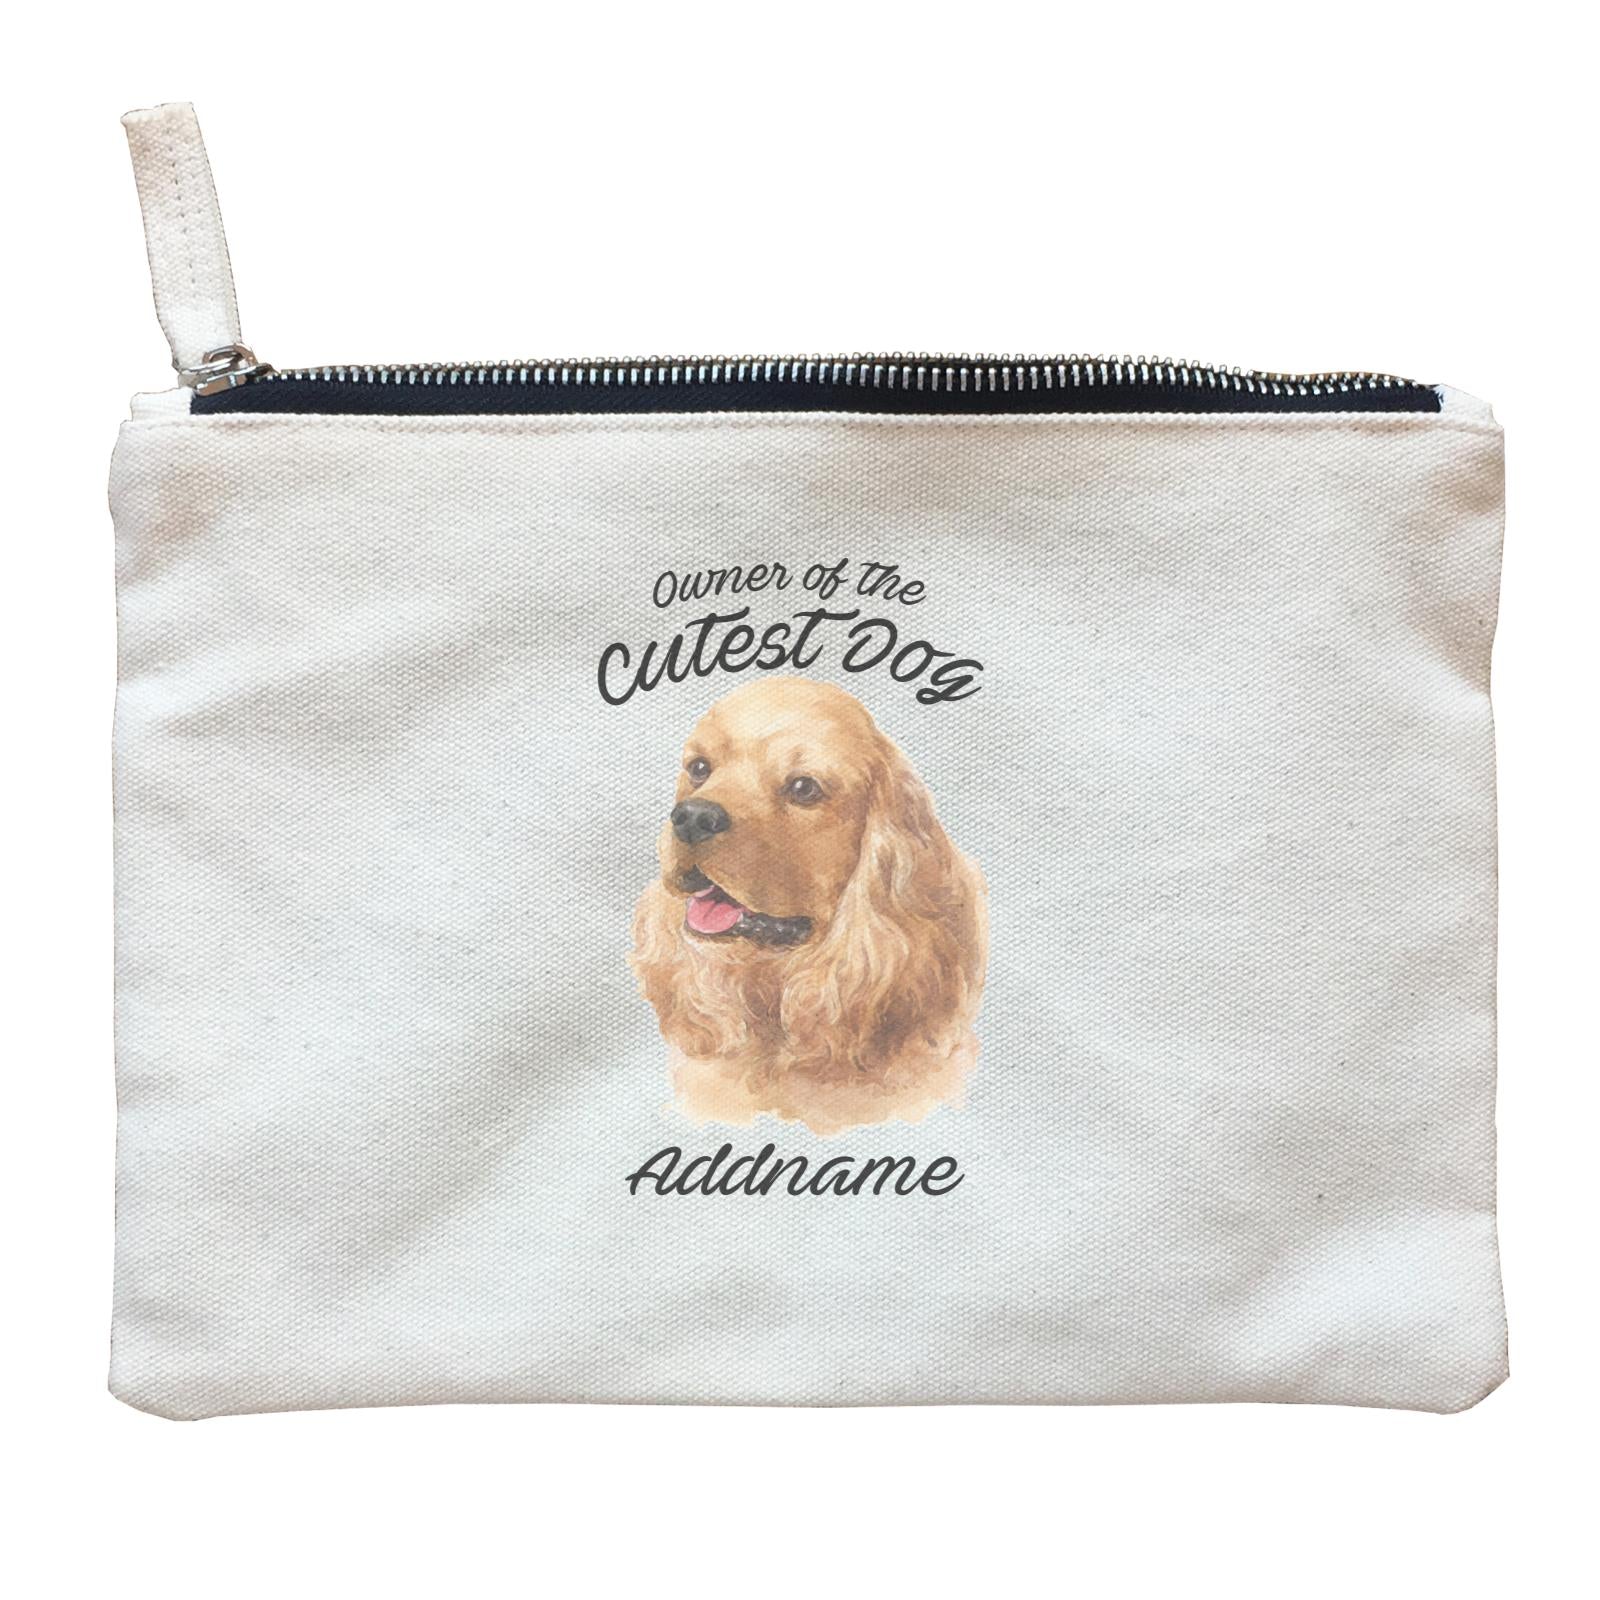 Watercolor Dog Owner Of The Cutest Dog Cocker Spaniel Addname Zipper Pouch